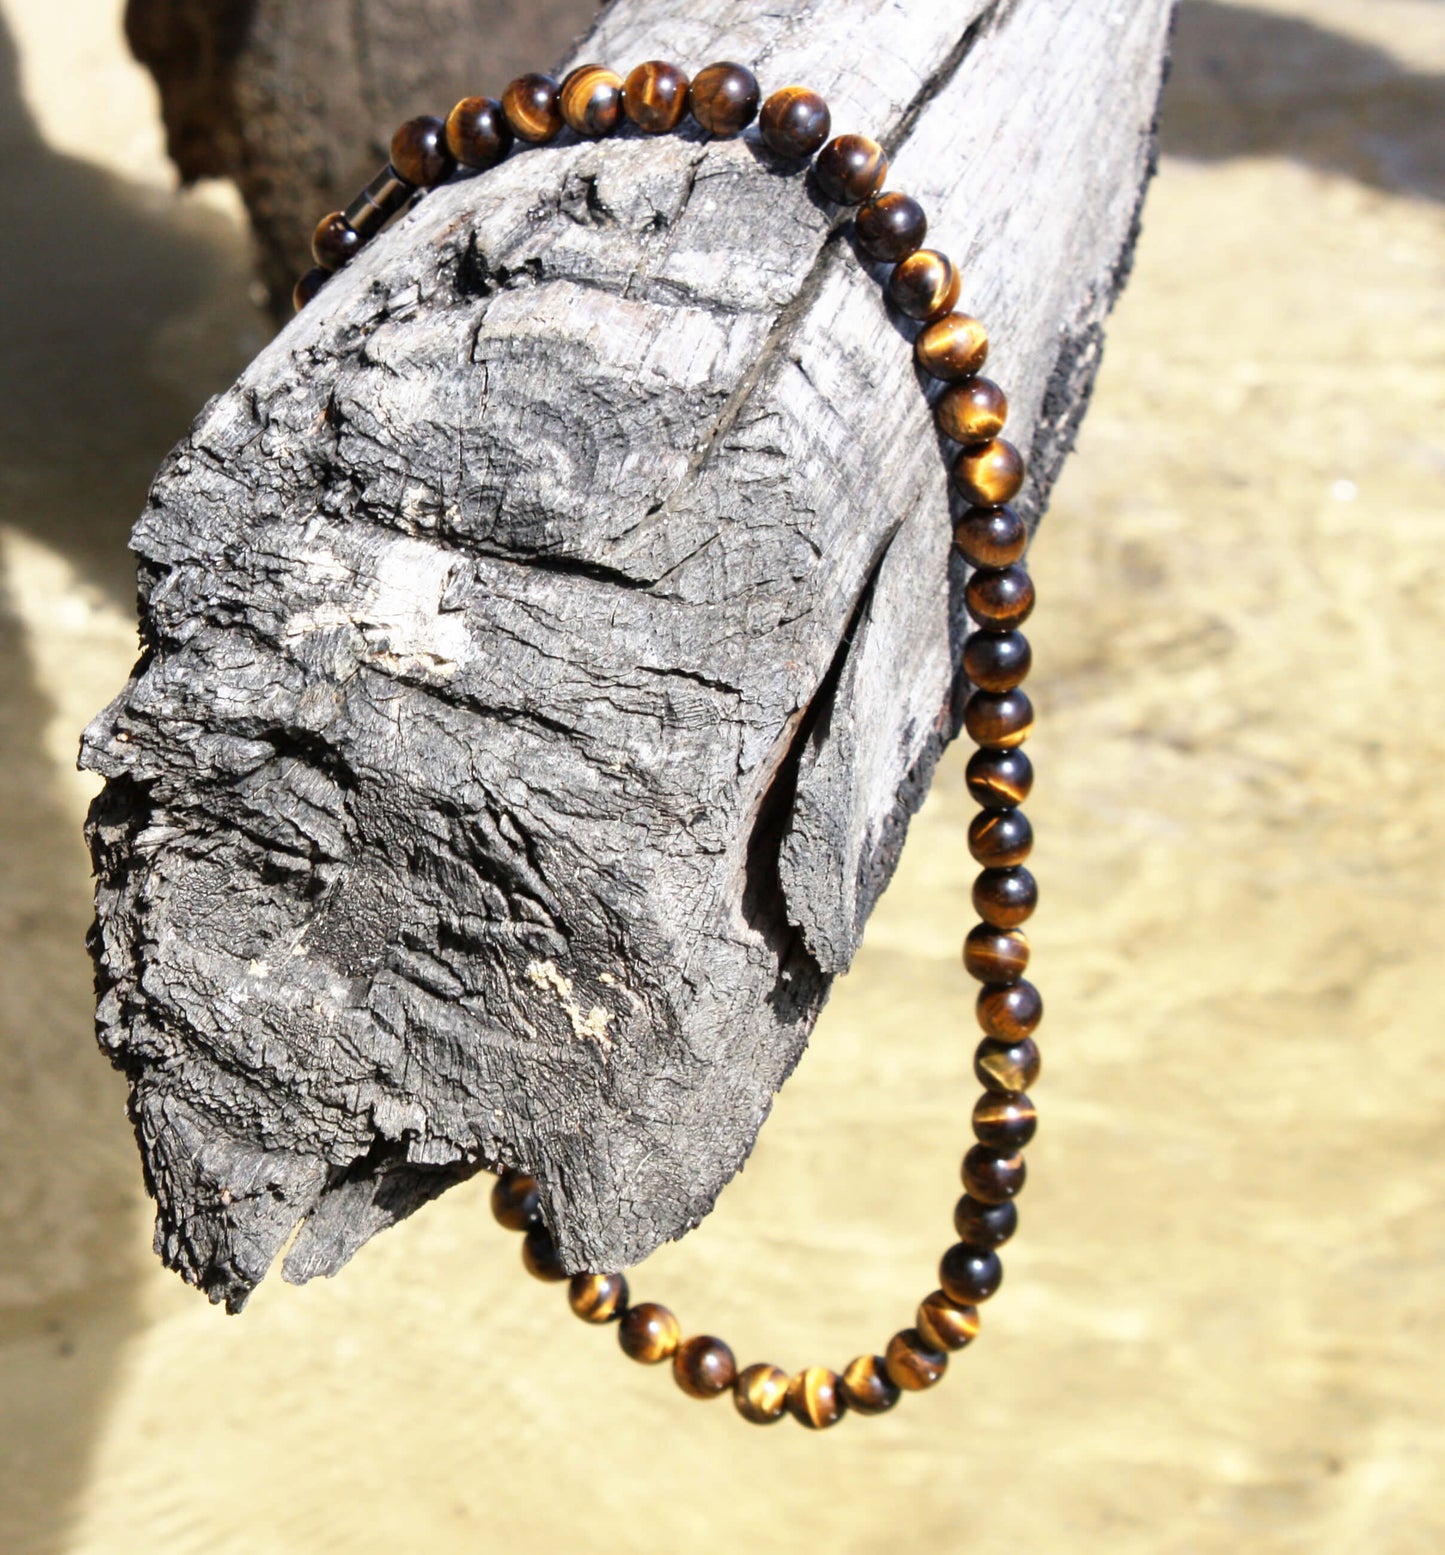 10mmTiger Eye Necklace - Mens Necklace - Beaded Necklace - Tribal Necklace - Good Luck - Confidence Gemstone Jewelry for Men/Women